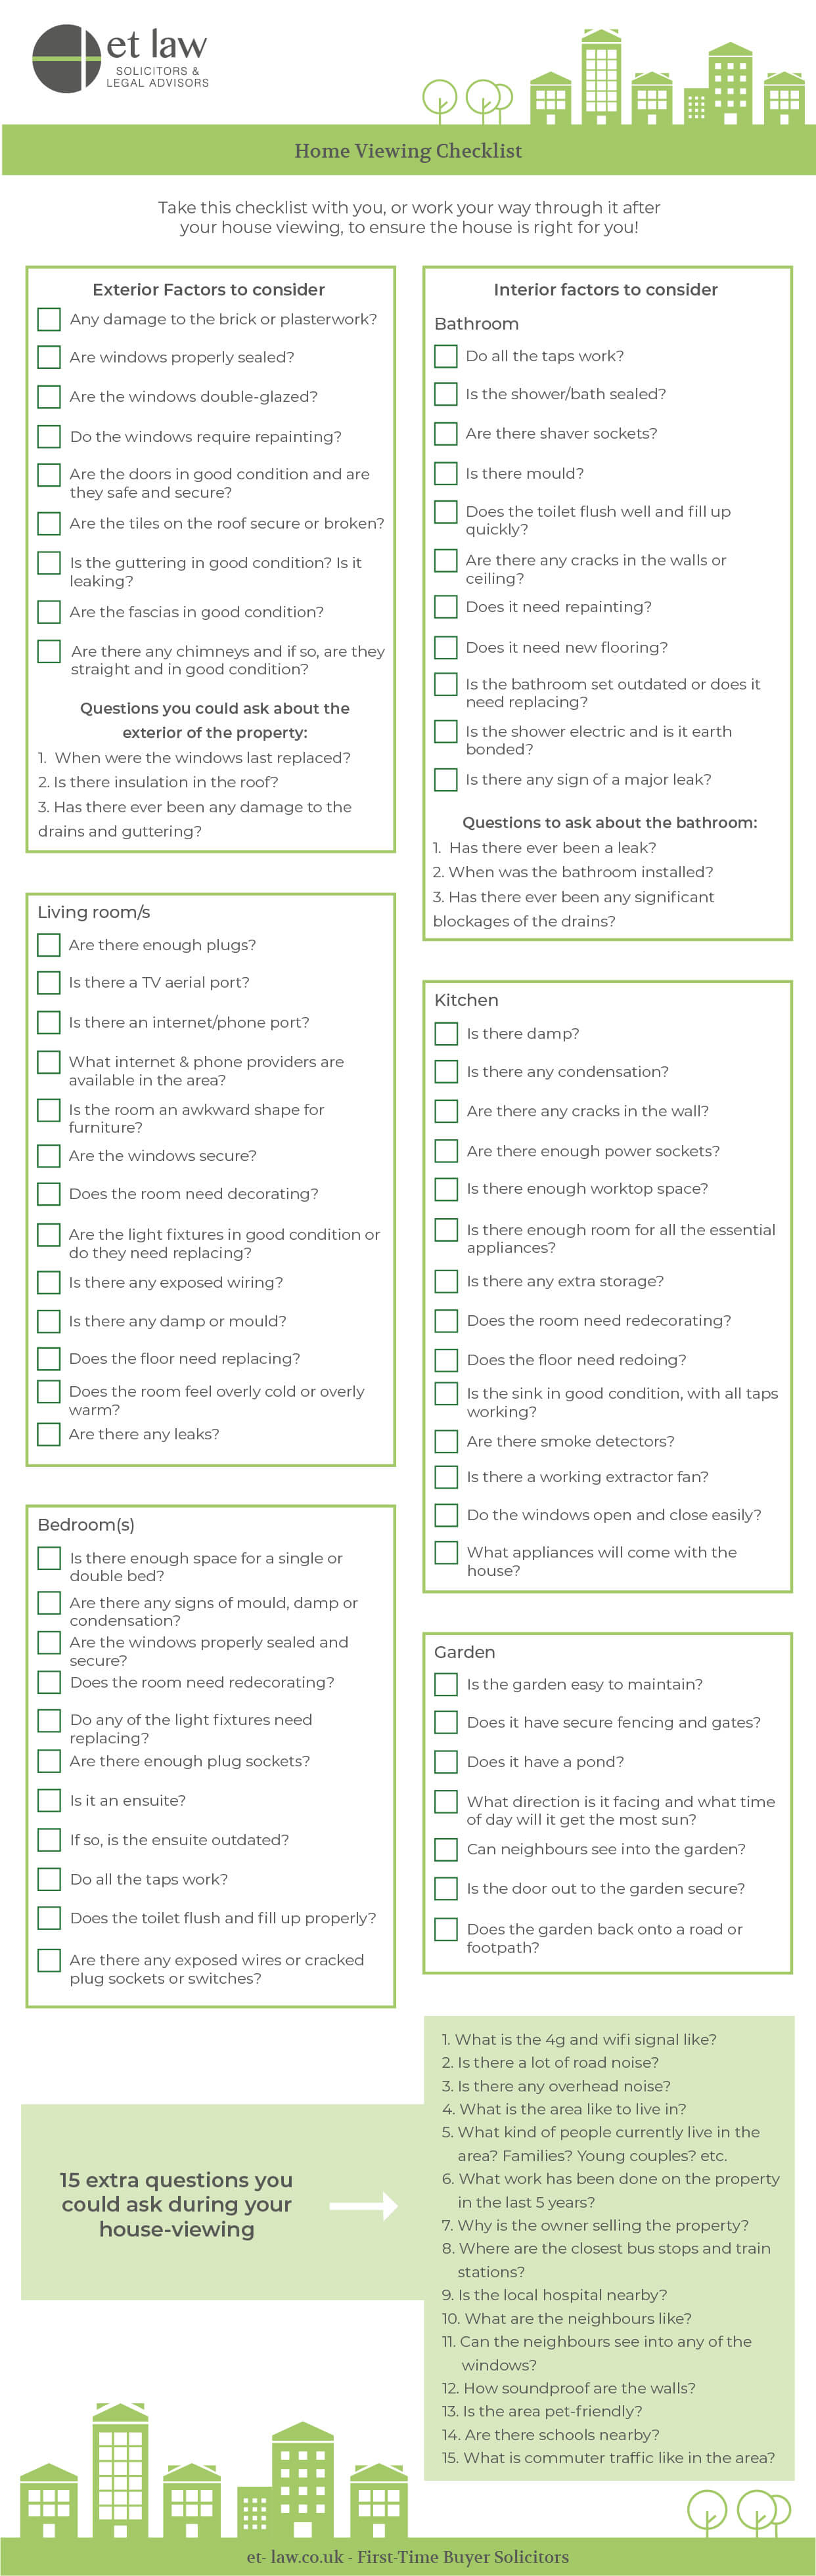 ET law infographic home viewing checklist